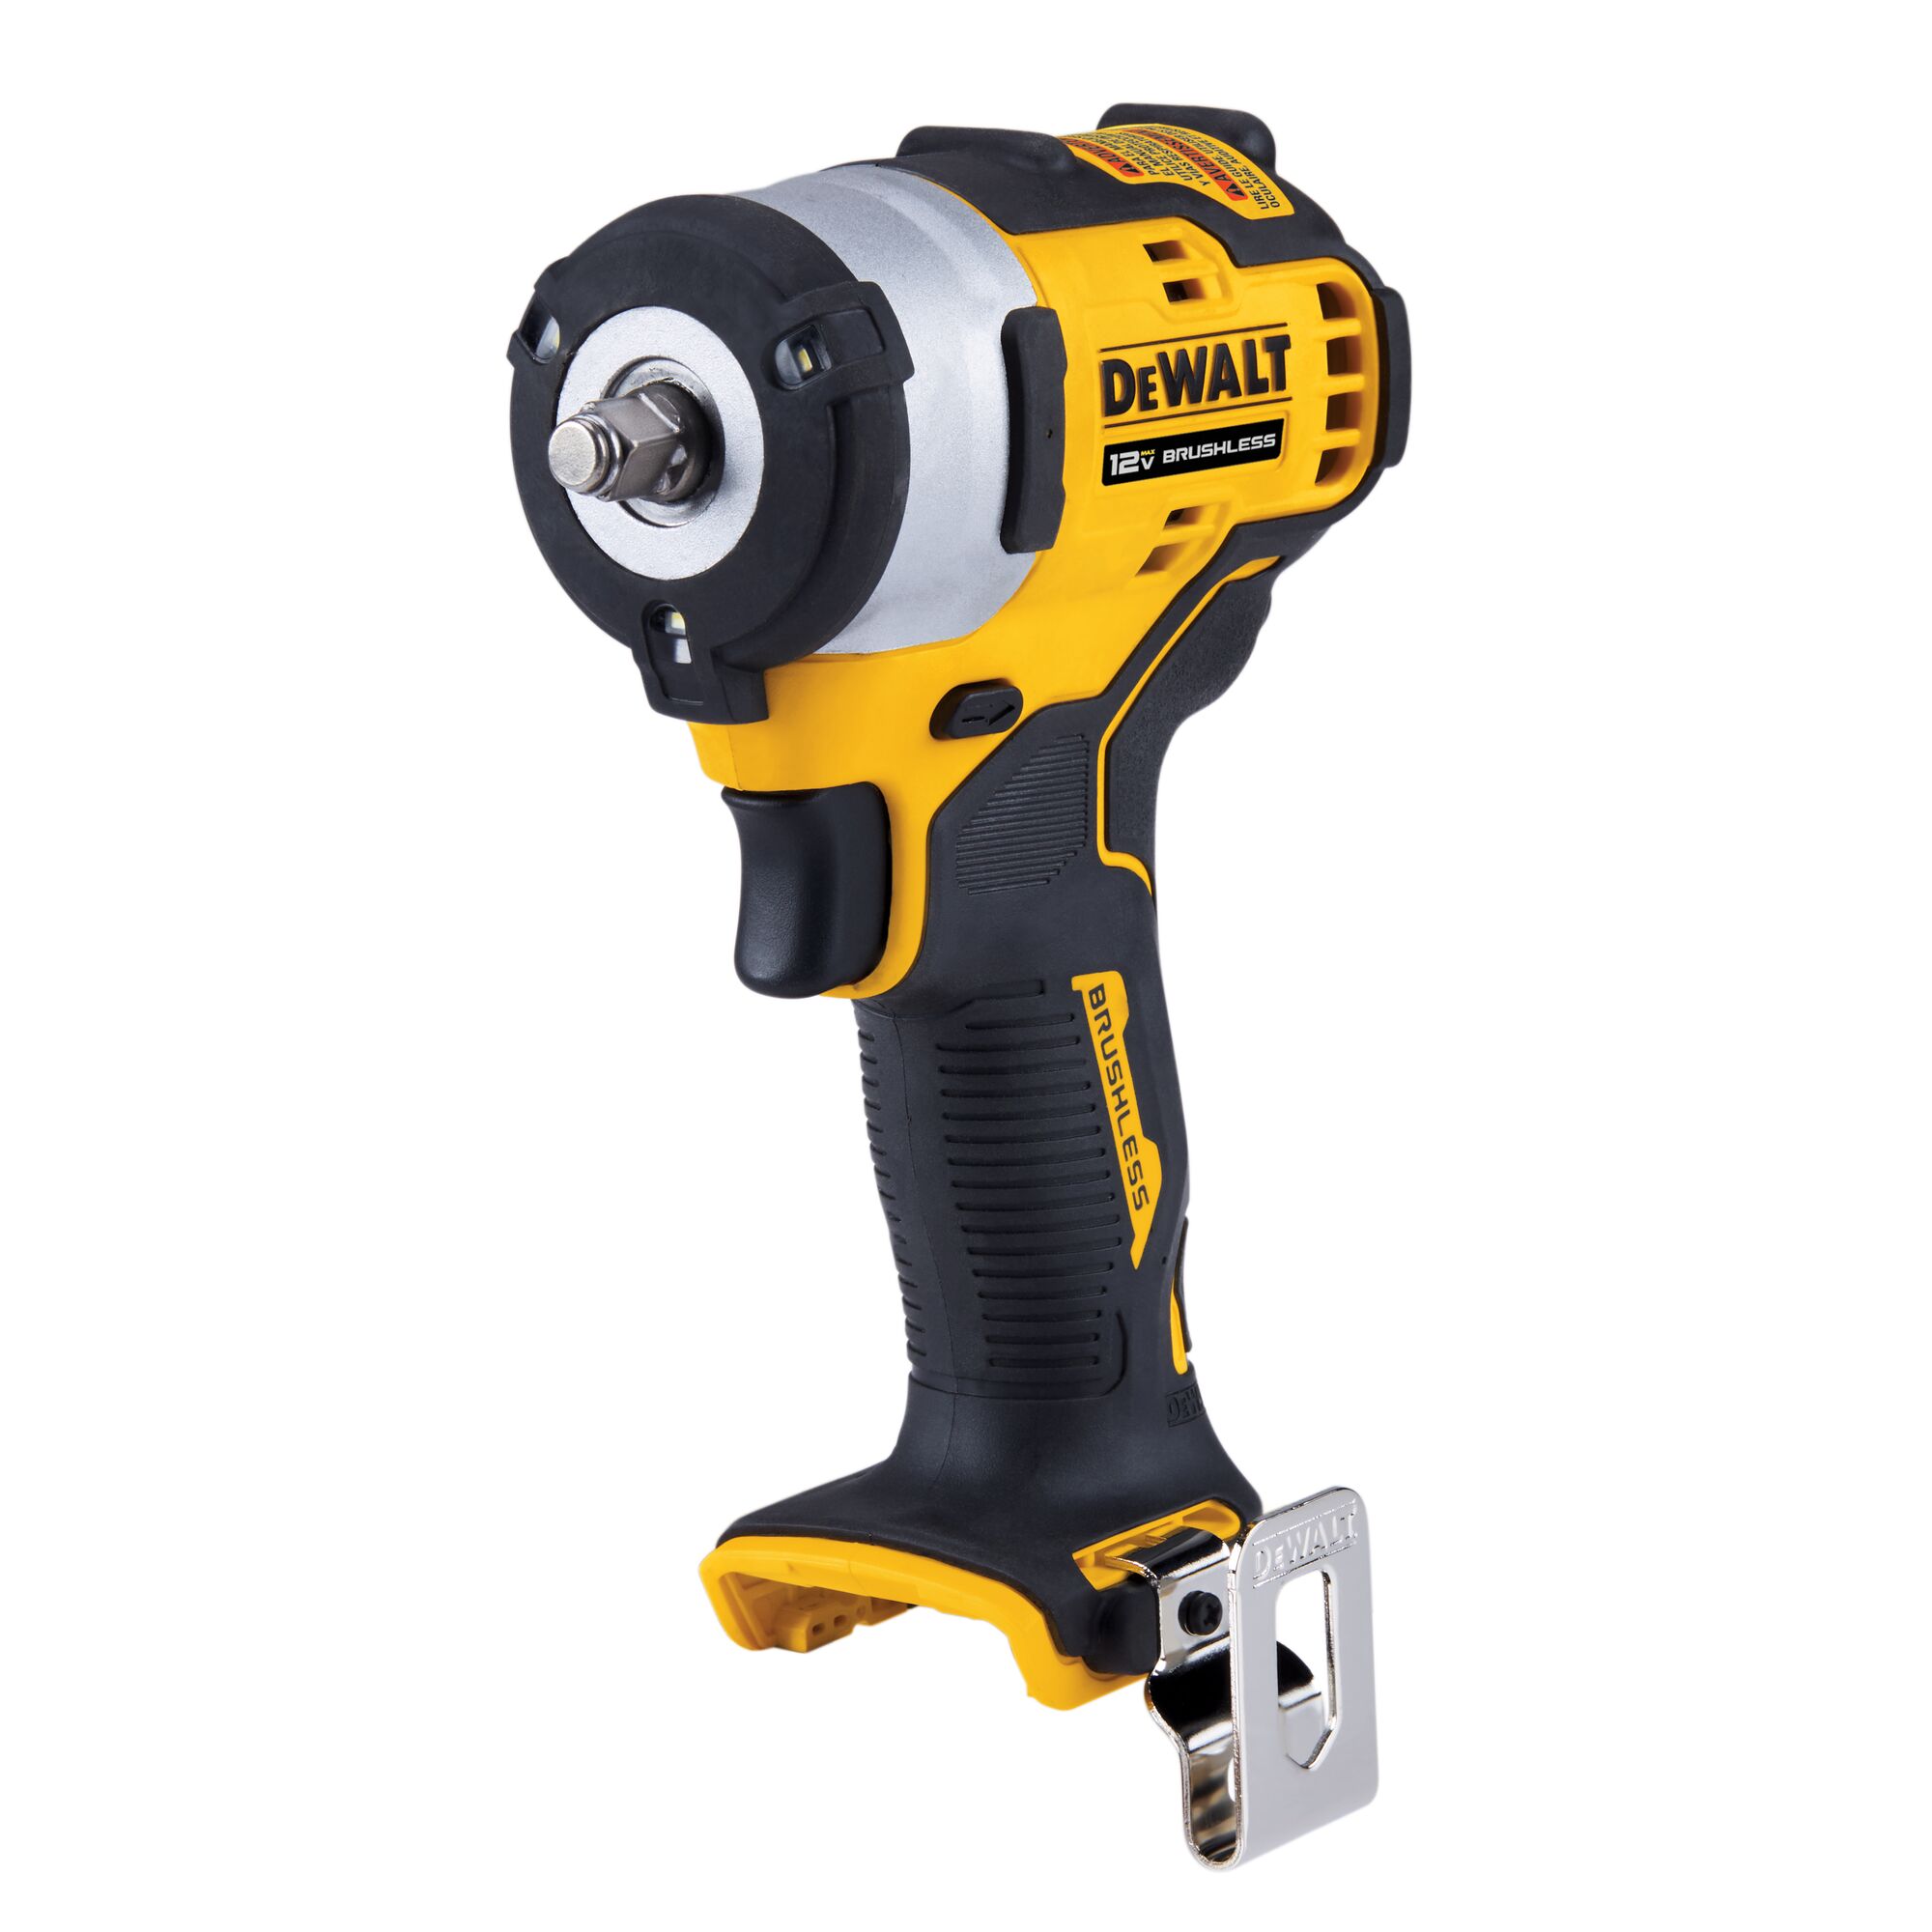 raid lack Smoothly XTREME 12V MAX* Brushless 3/8 in. Cordless Impact Wrench (Tool Only) |  DEWALT